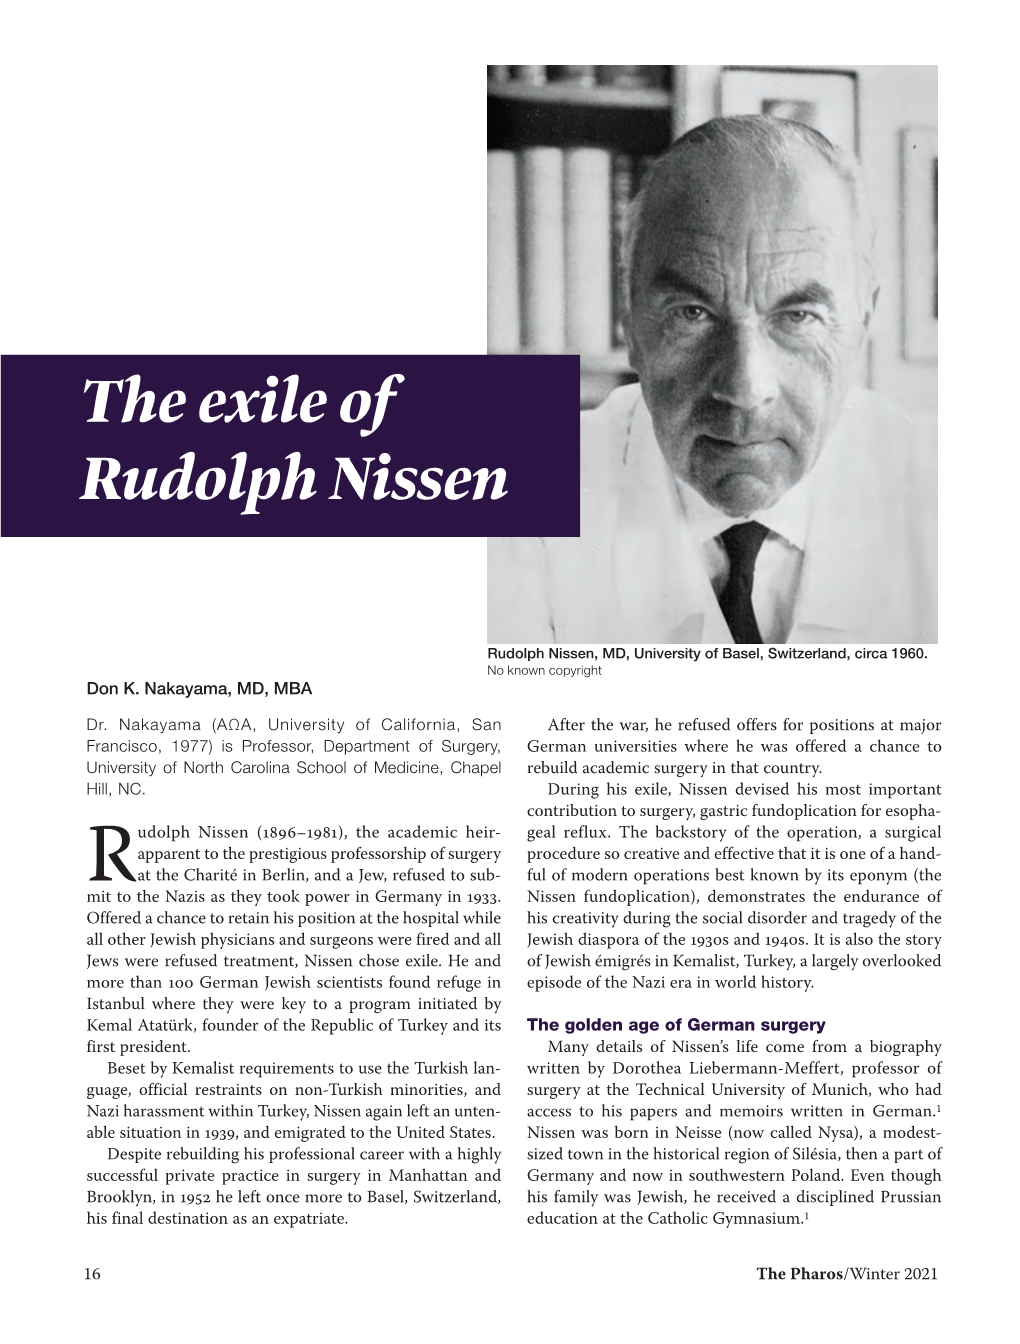 The Exile of Rudolph Nissen